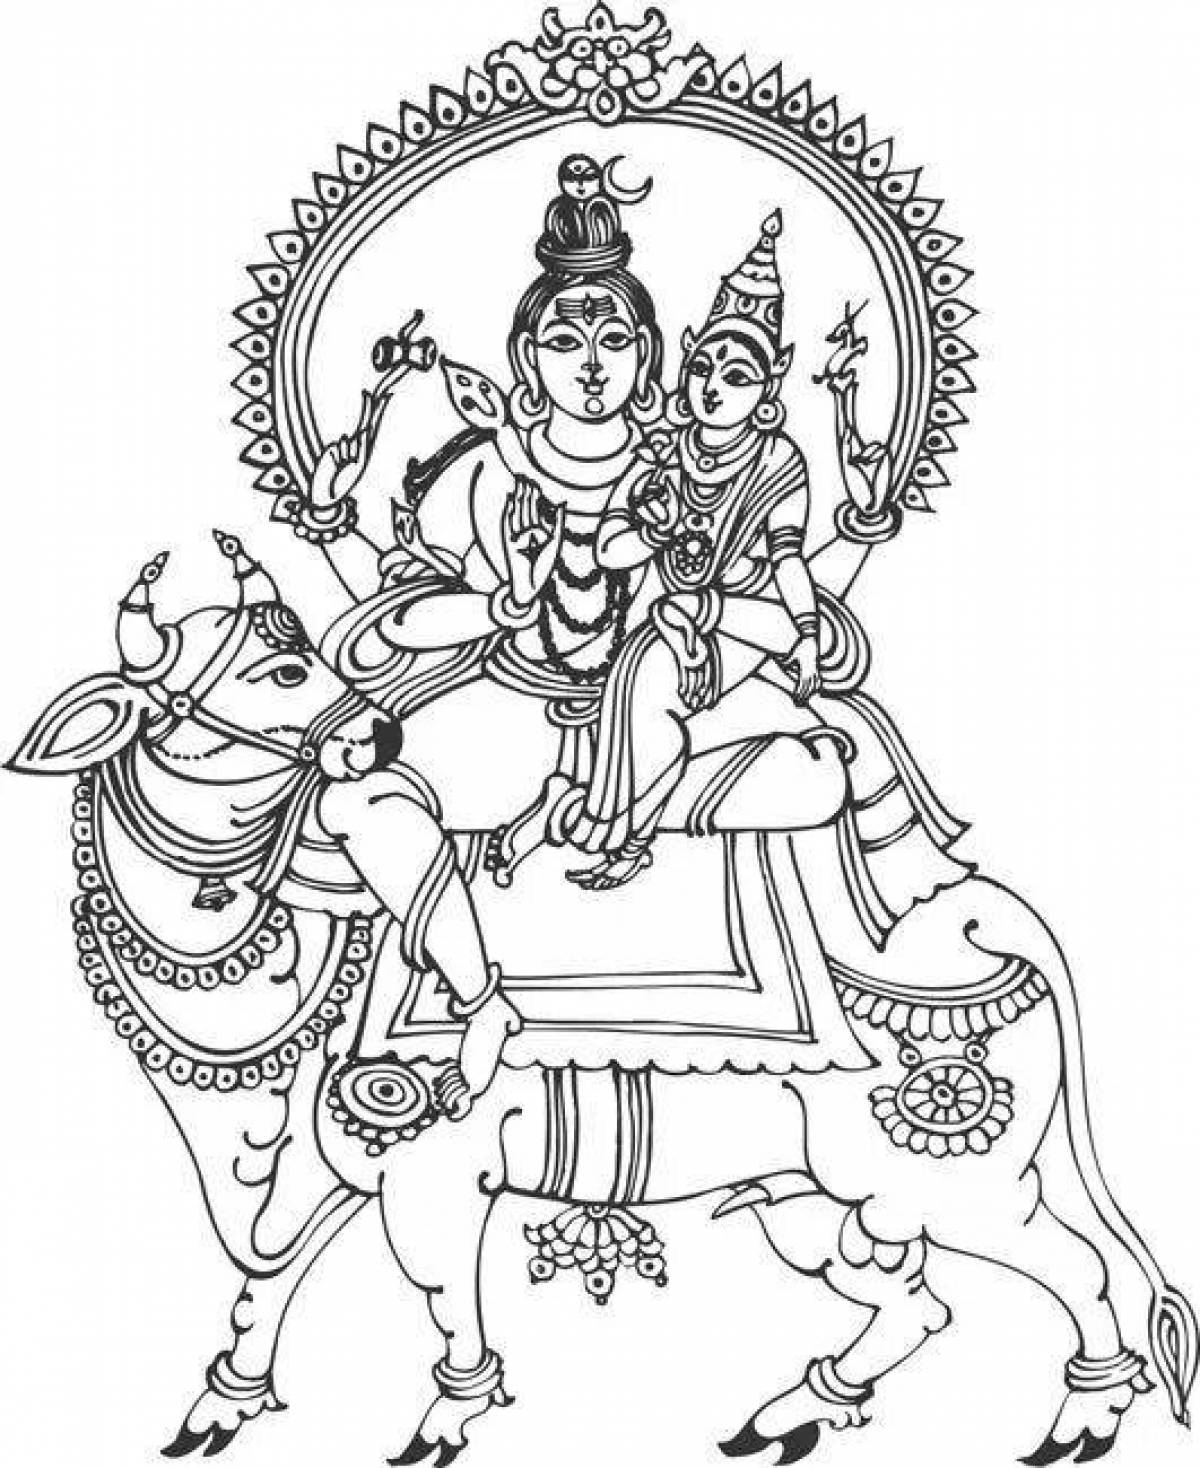 Shiva's adorable coloring page